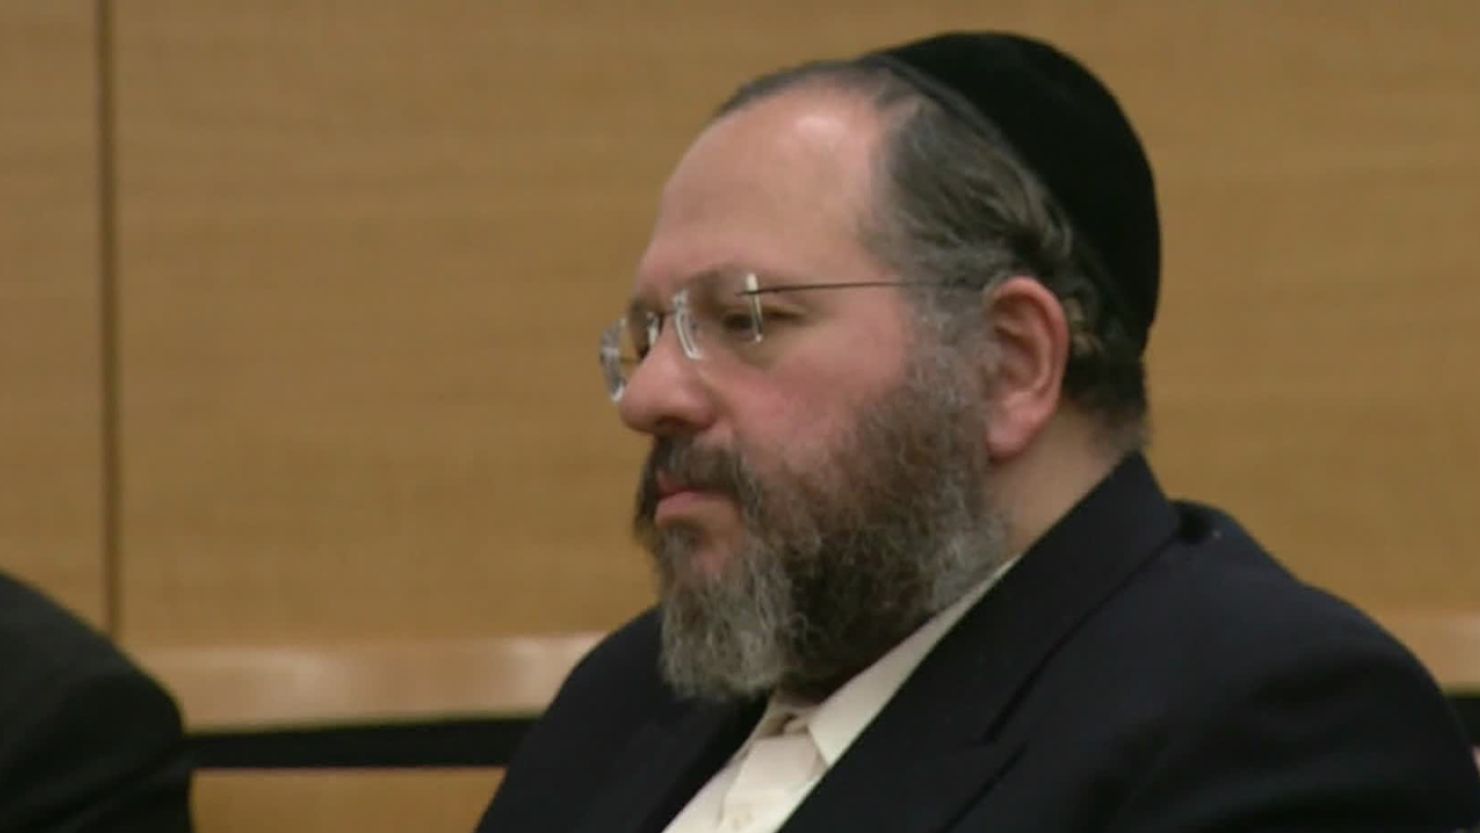 A judge sentenced Nechemya Weberman to 103 years in prison Tuesday for sexually abusing children.